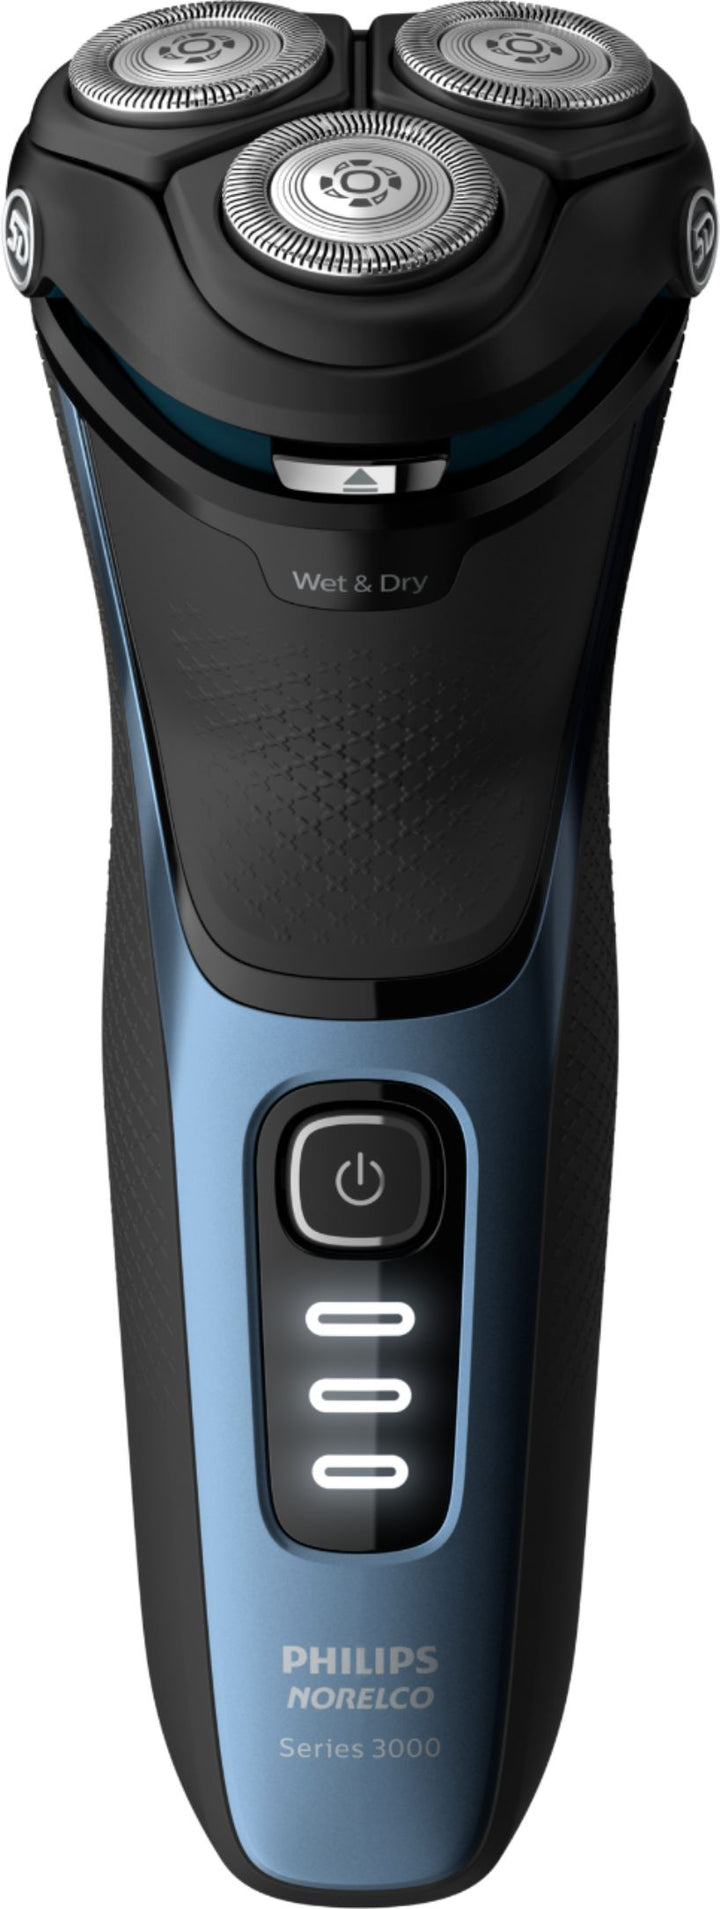 Philips Norelco - 3500 series Wet/Dry Electric Shaver - Storm Gray_8